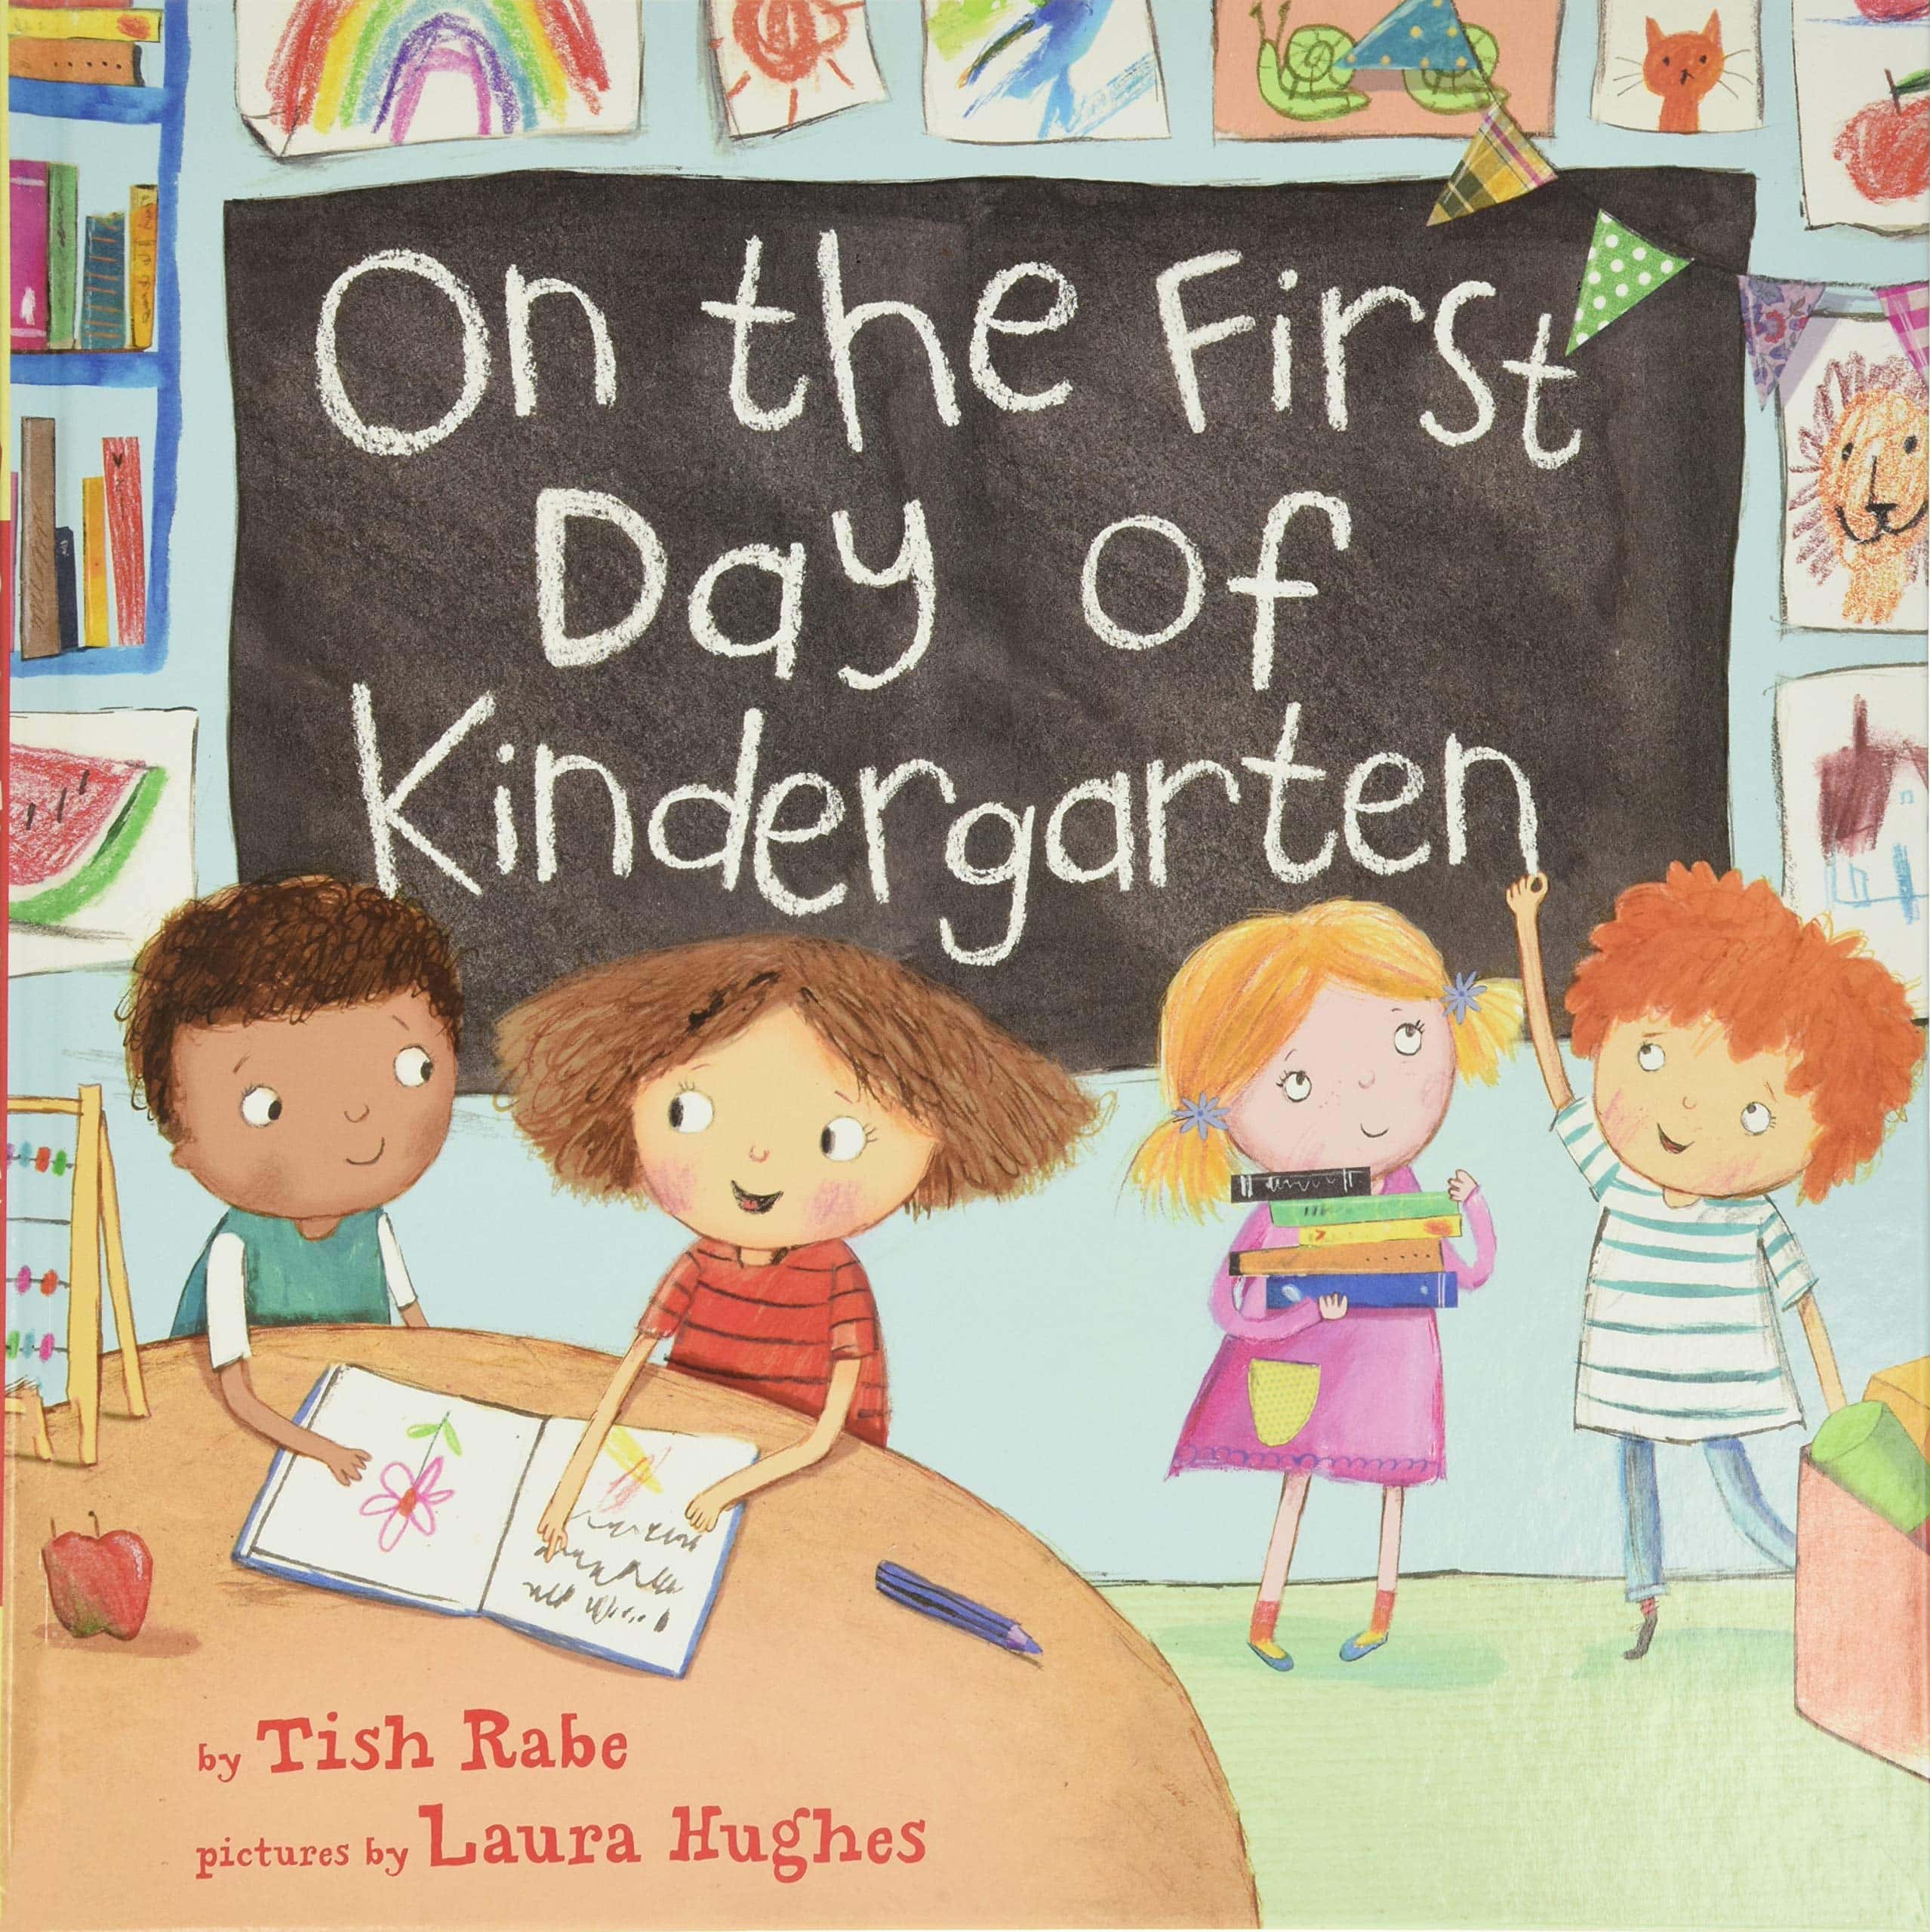 "On the First Day of Kindergarten" by Tish Rabe